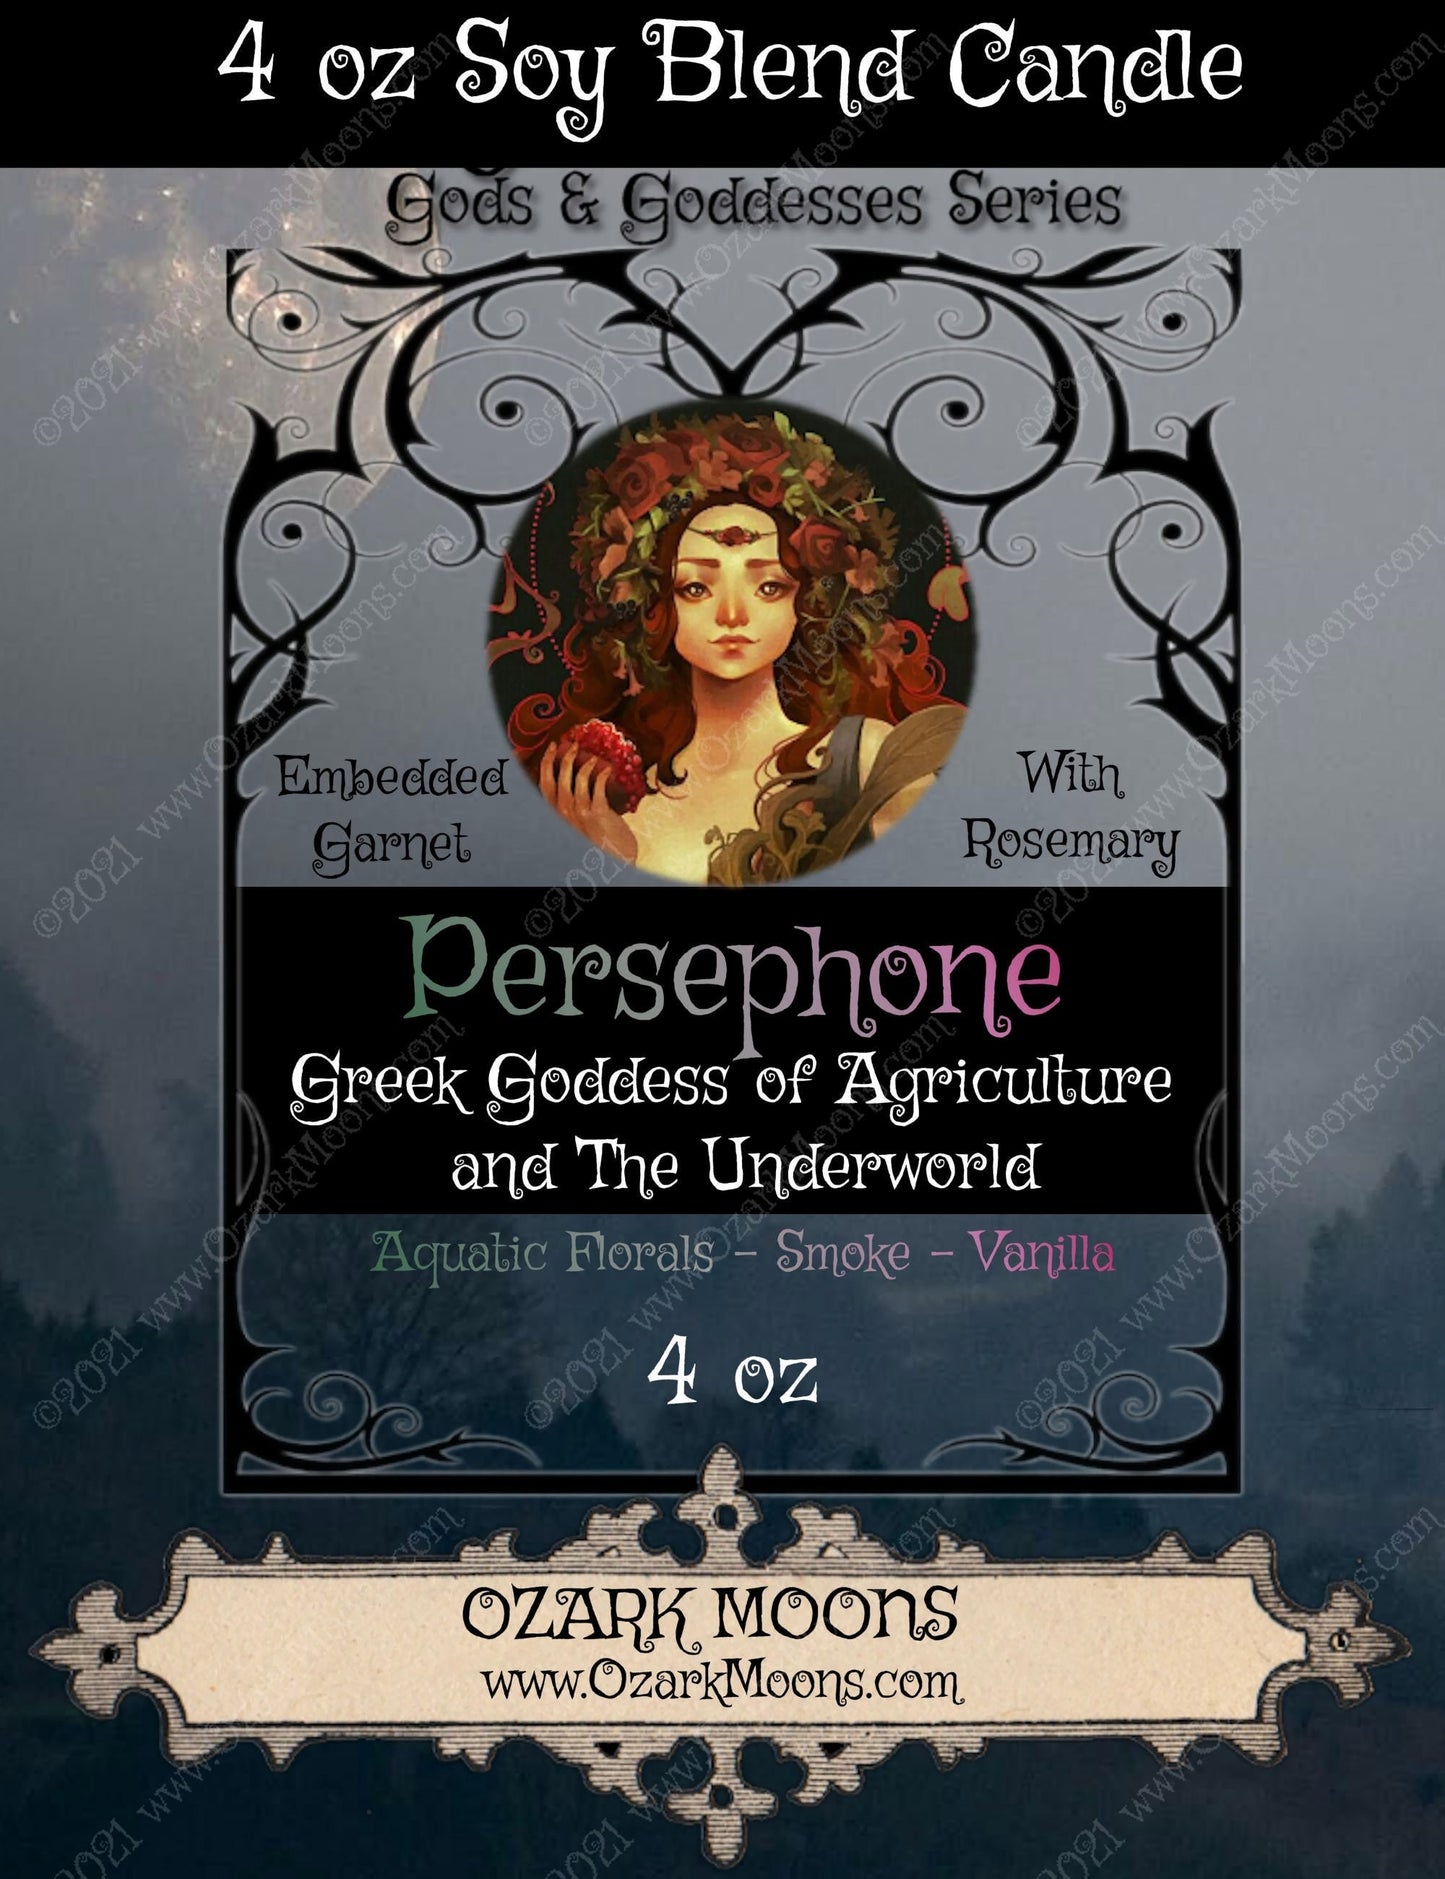 Persephone Greek Goddess of the Underworld and Agriculture 4 oz Crystal Candle With Red Garnet and Rosemary - Mythology, Wicca, Pagan